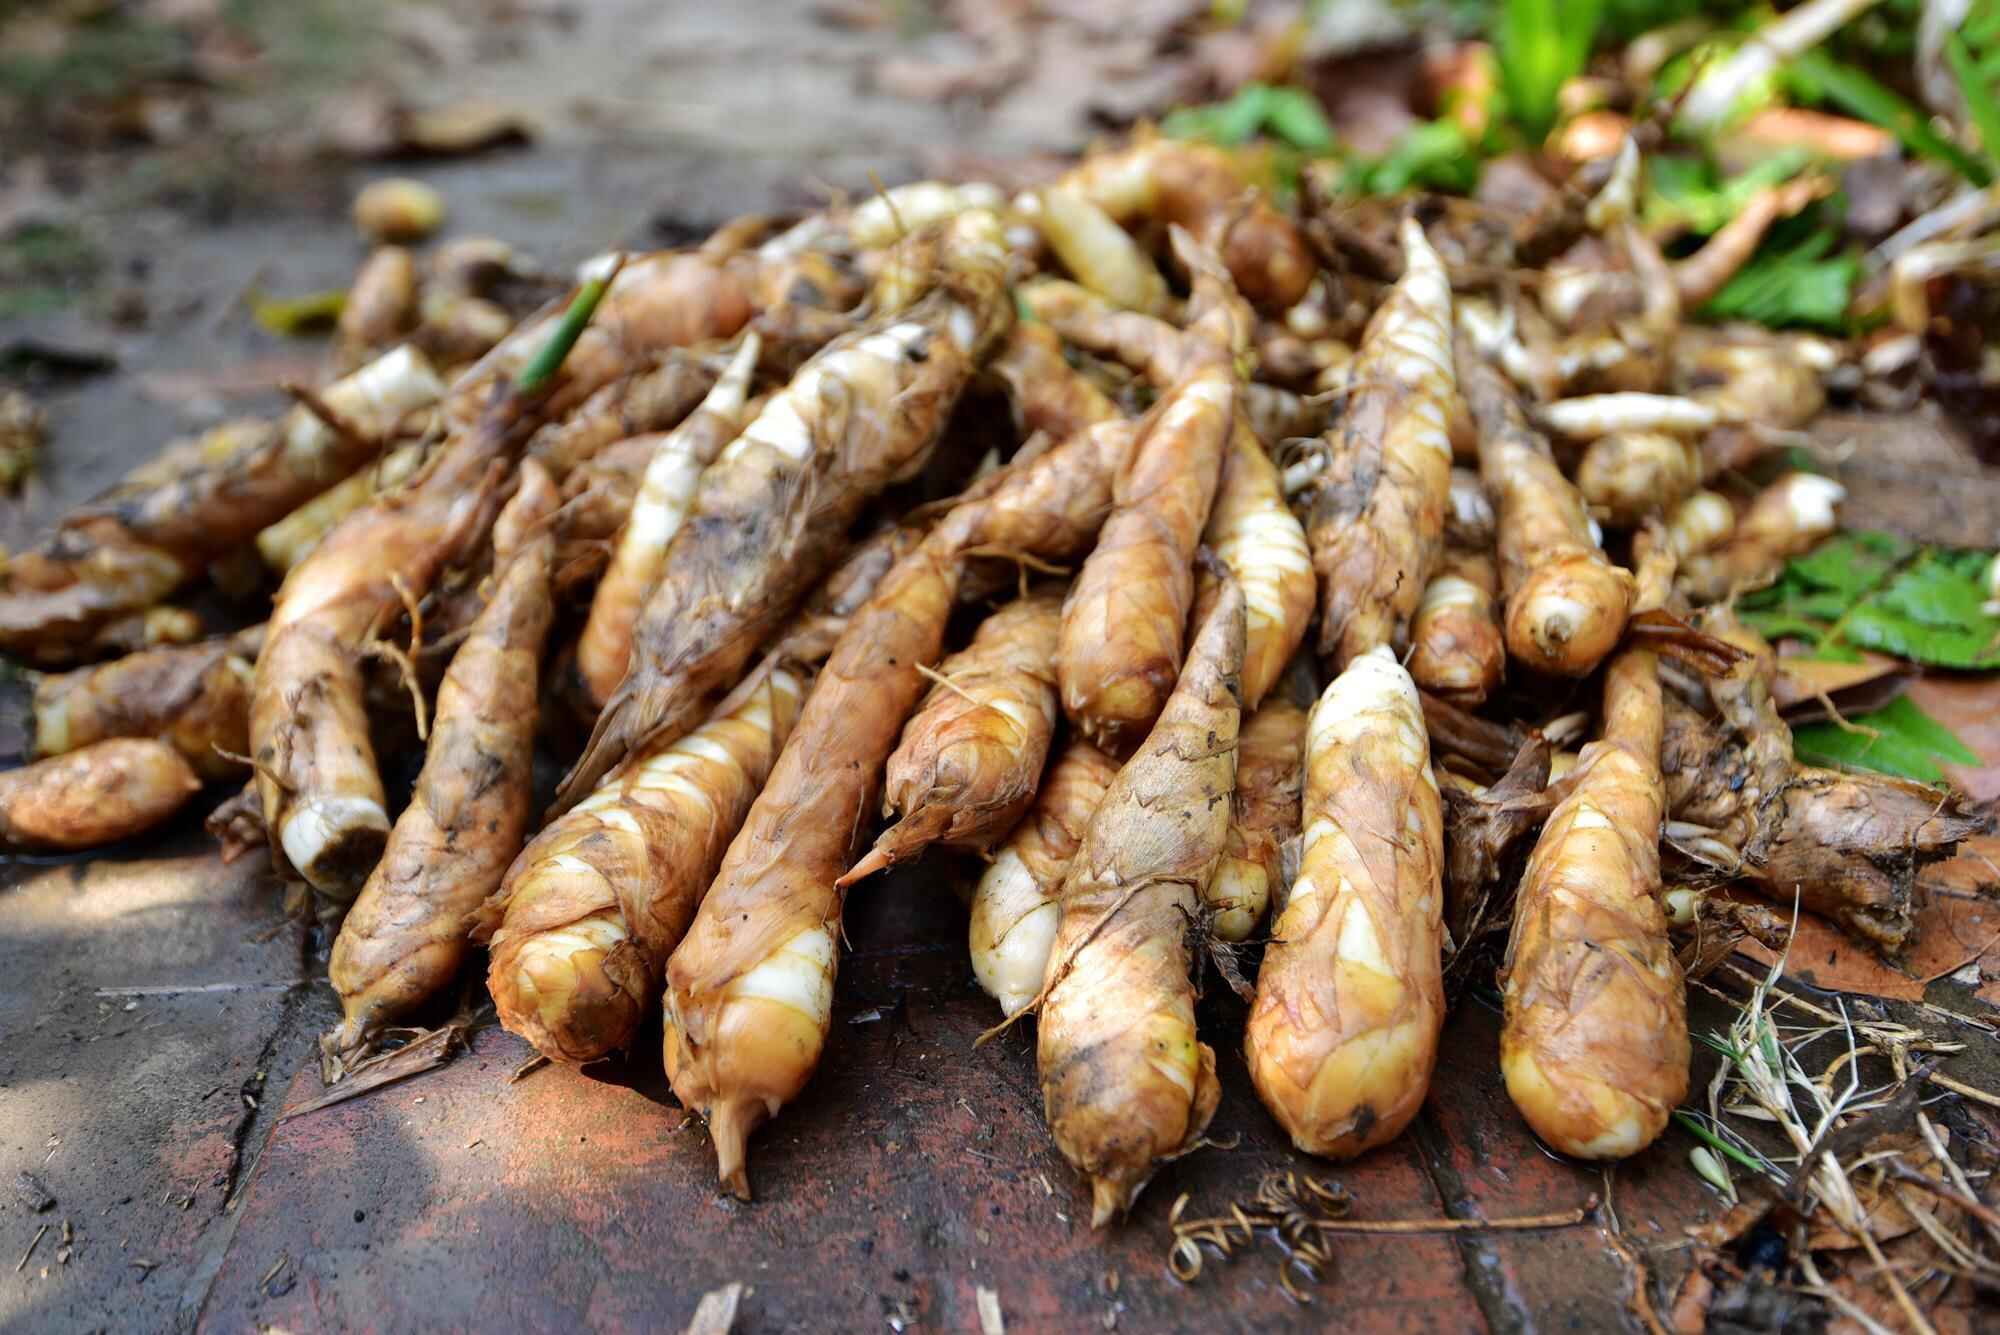 Arrowroot Information and Facts